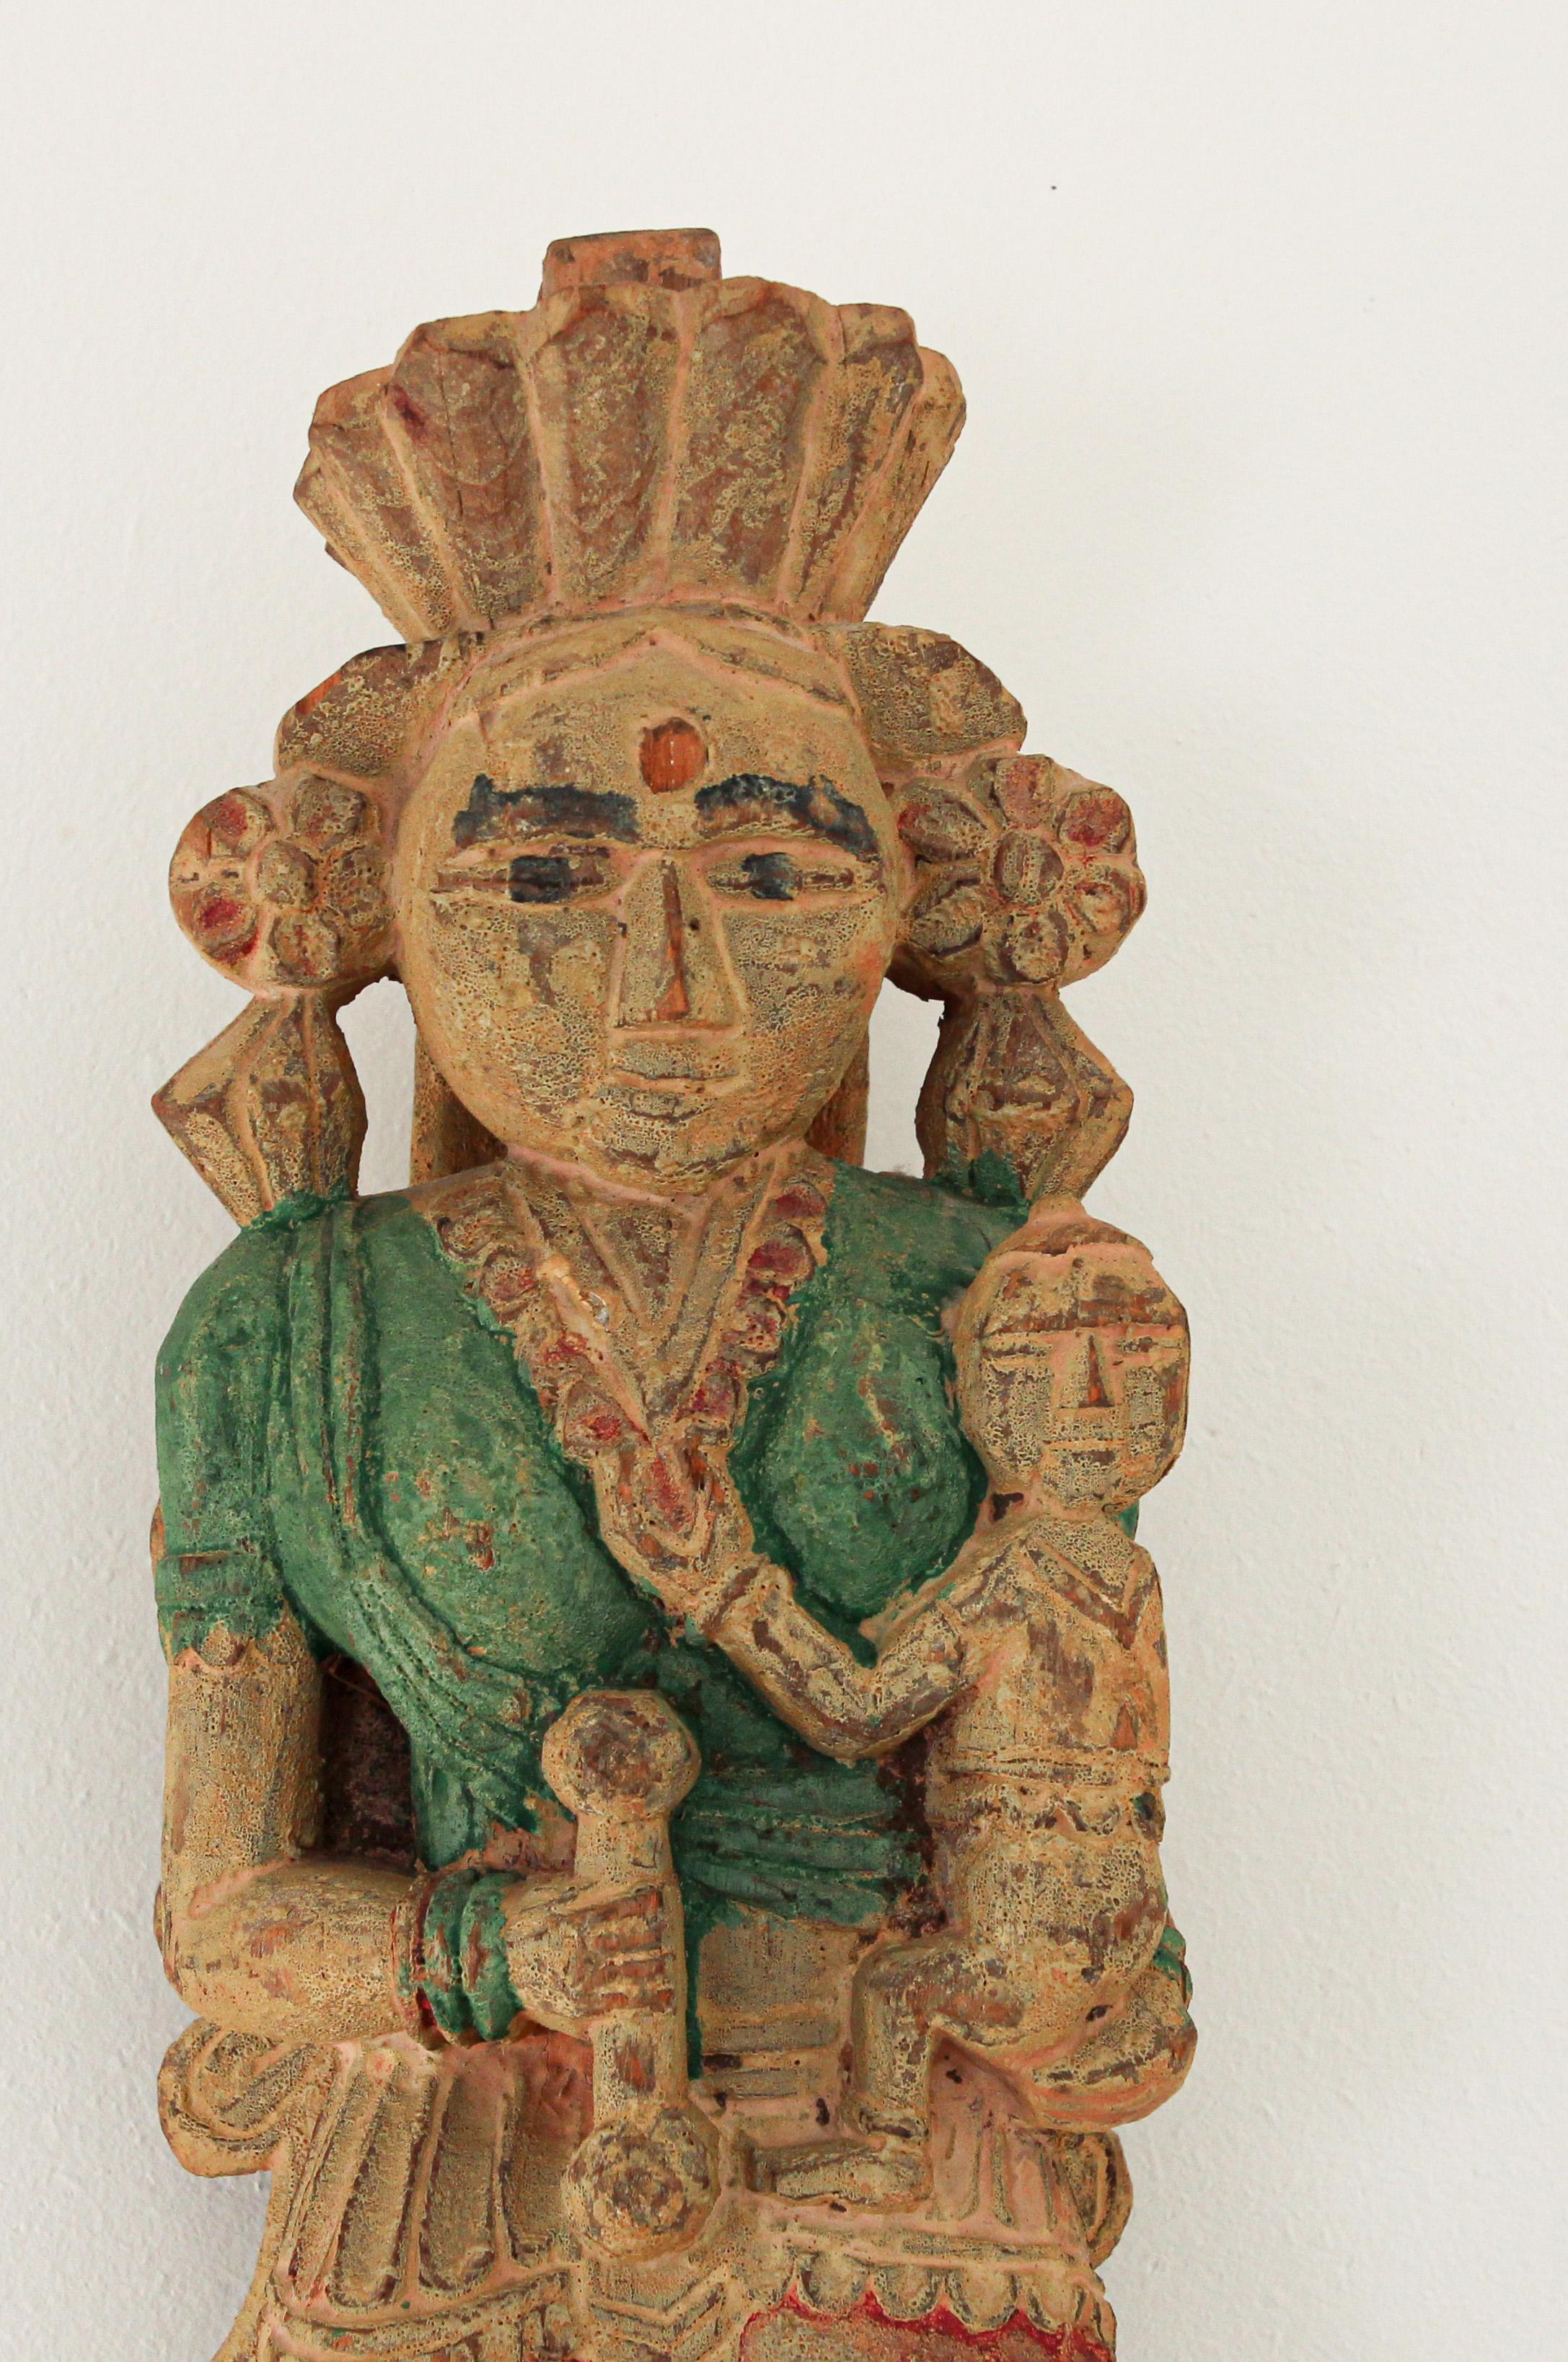 18th Century Architectural Hand Carved Wood Temple Sculpture of Mother and Child from India